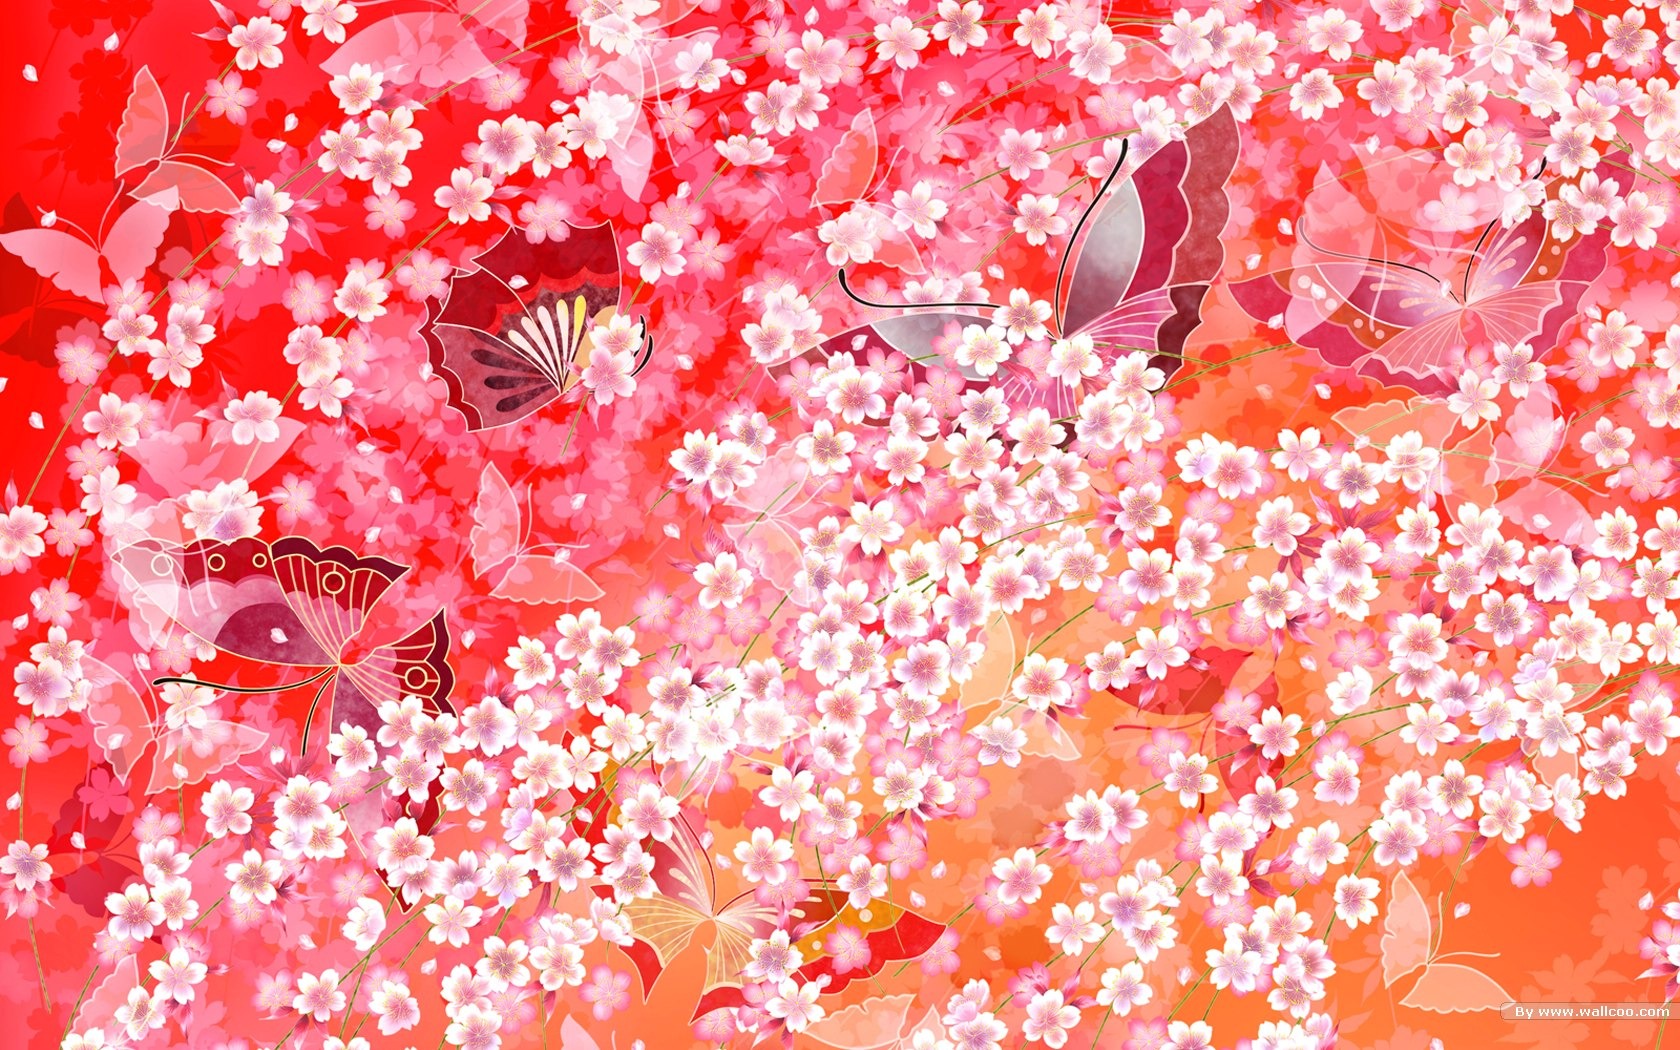 Japan Style Wallpaper Pattern And Color 14 1680x1050 Wallpaper Download Japan Style Wallpaper Pattern And Color Design Wallpapers V3 Wallpaper Site